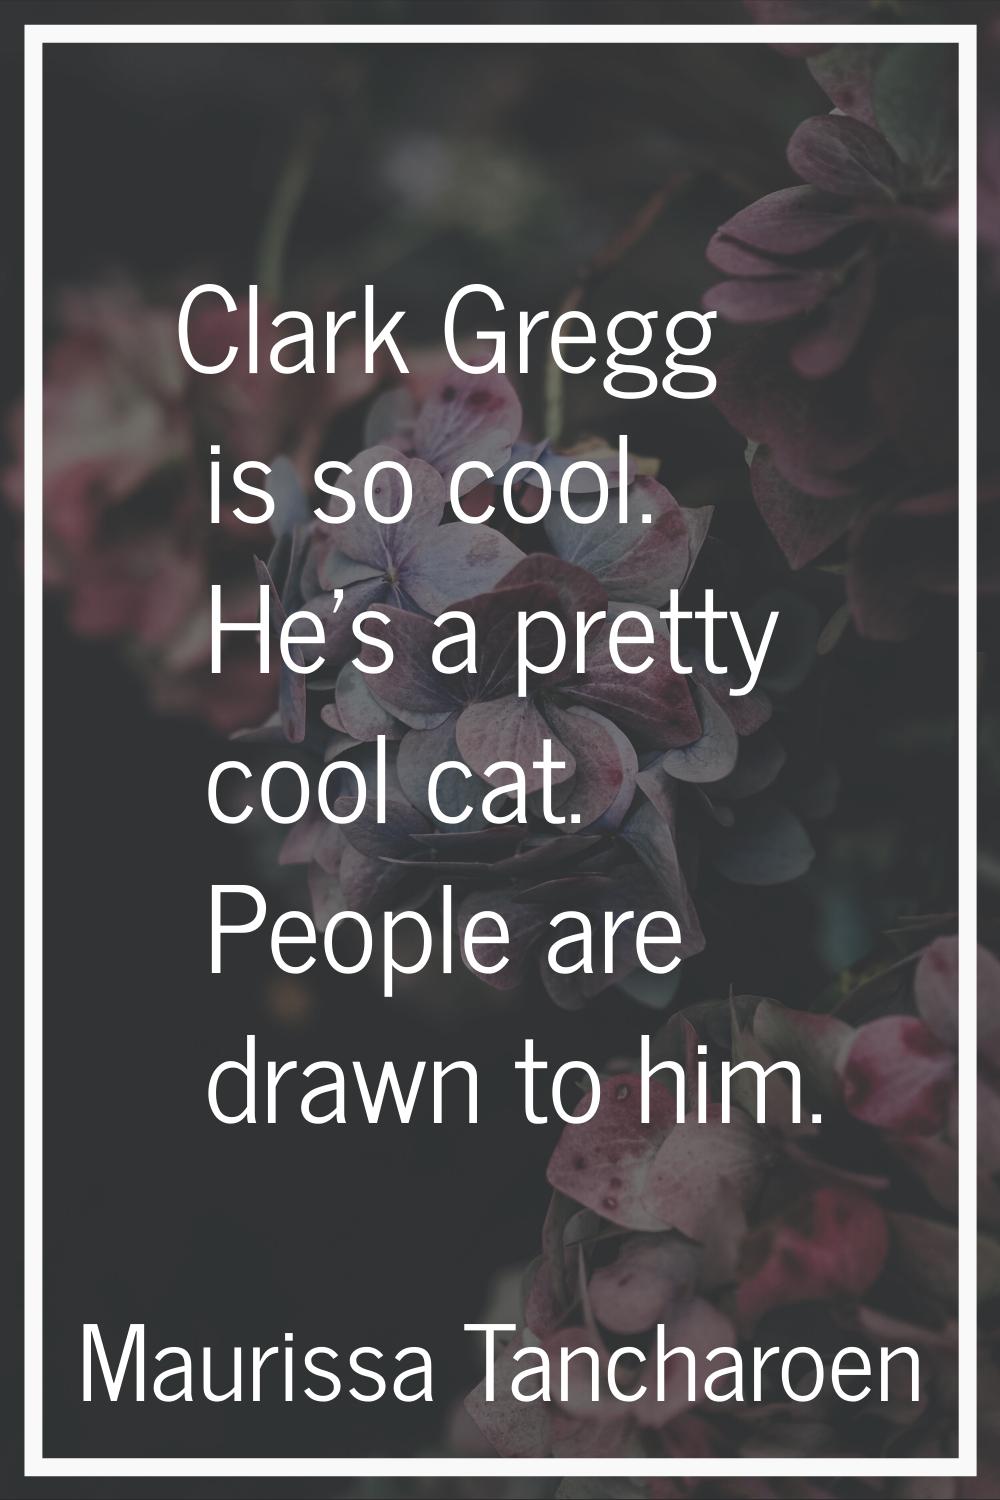 Clark Gregg is so cool. He's a pretty cool cat. People are drawn to him.